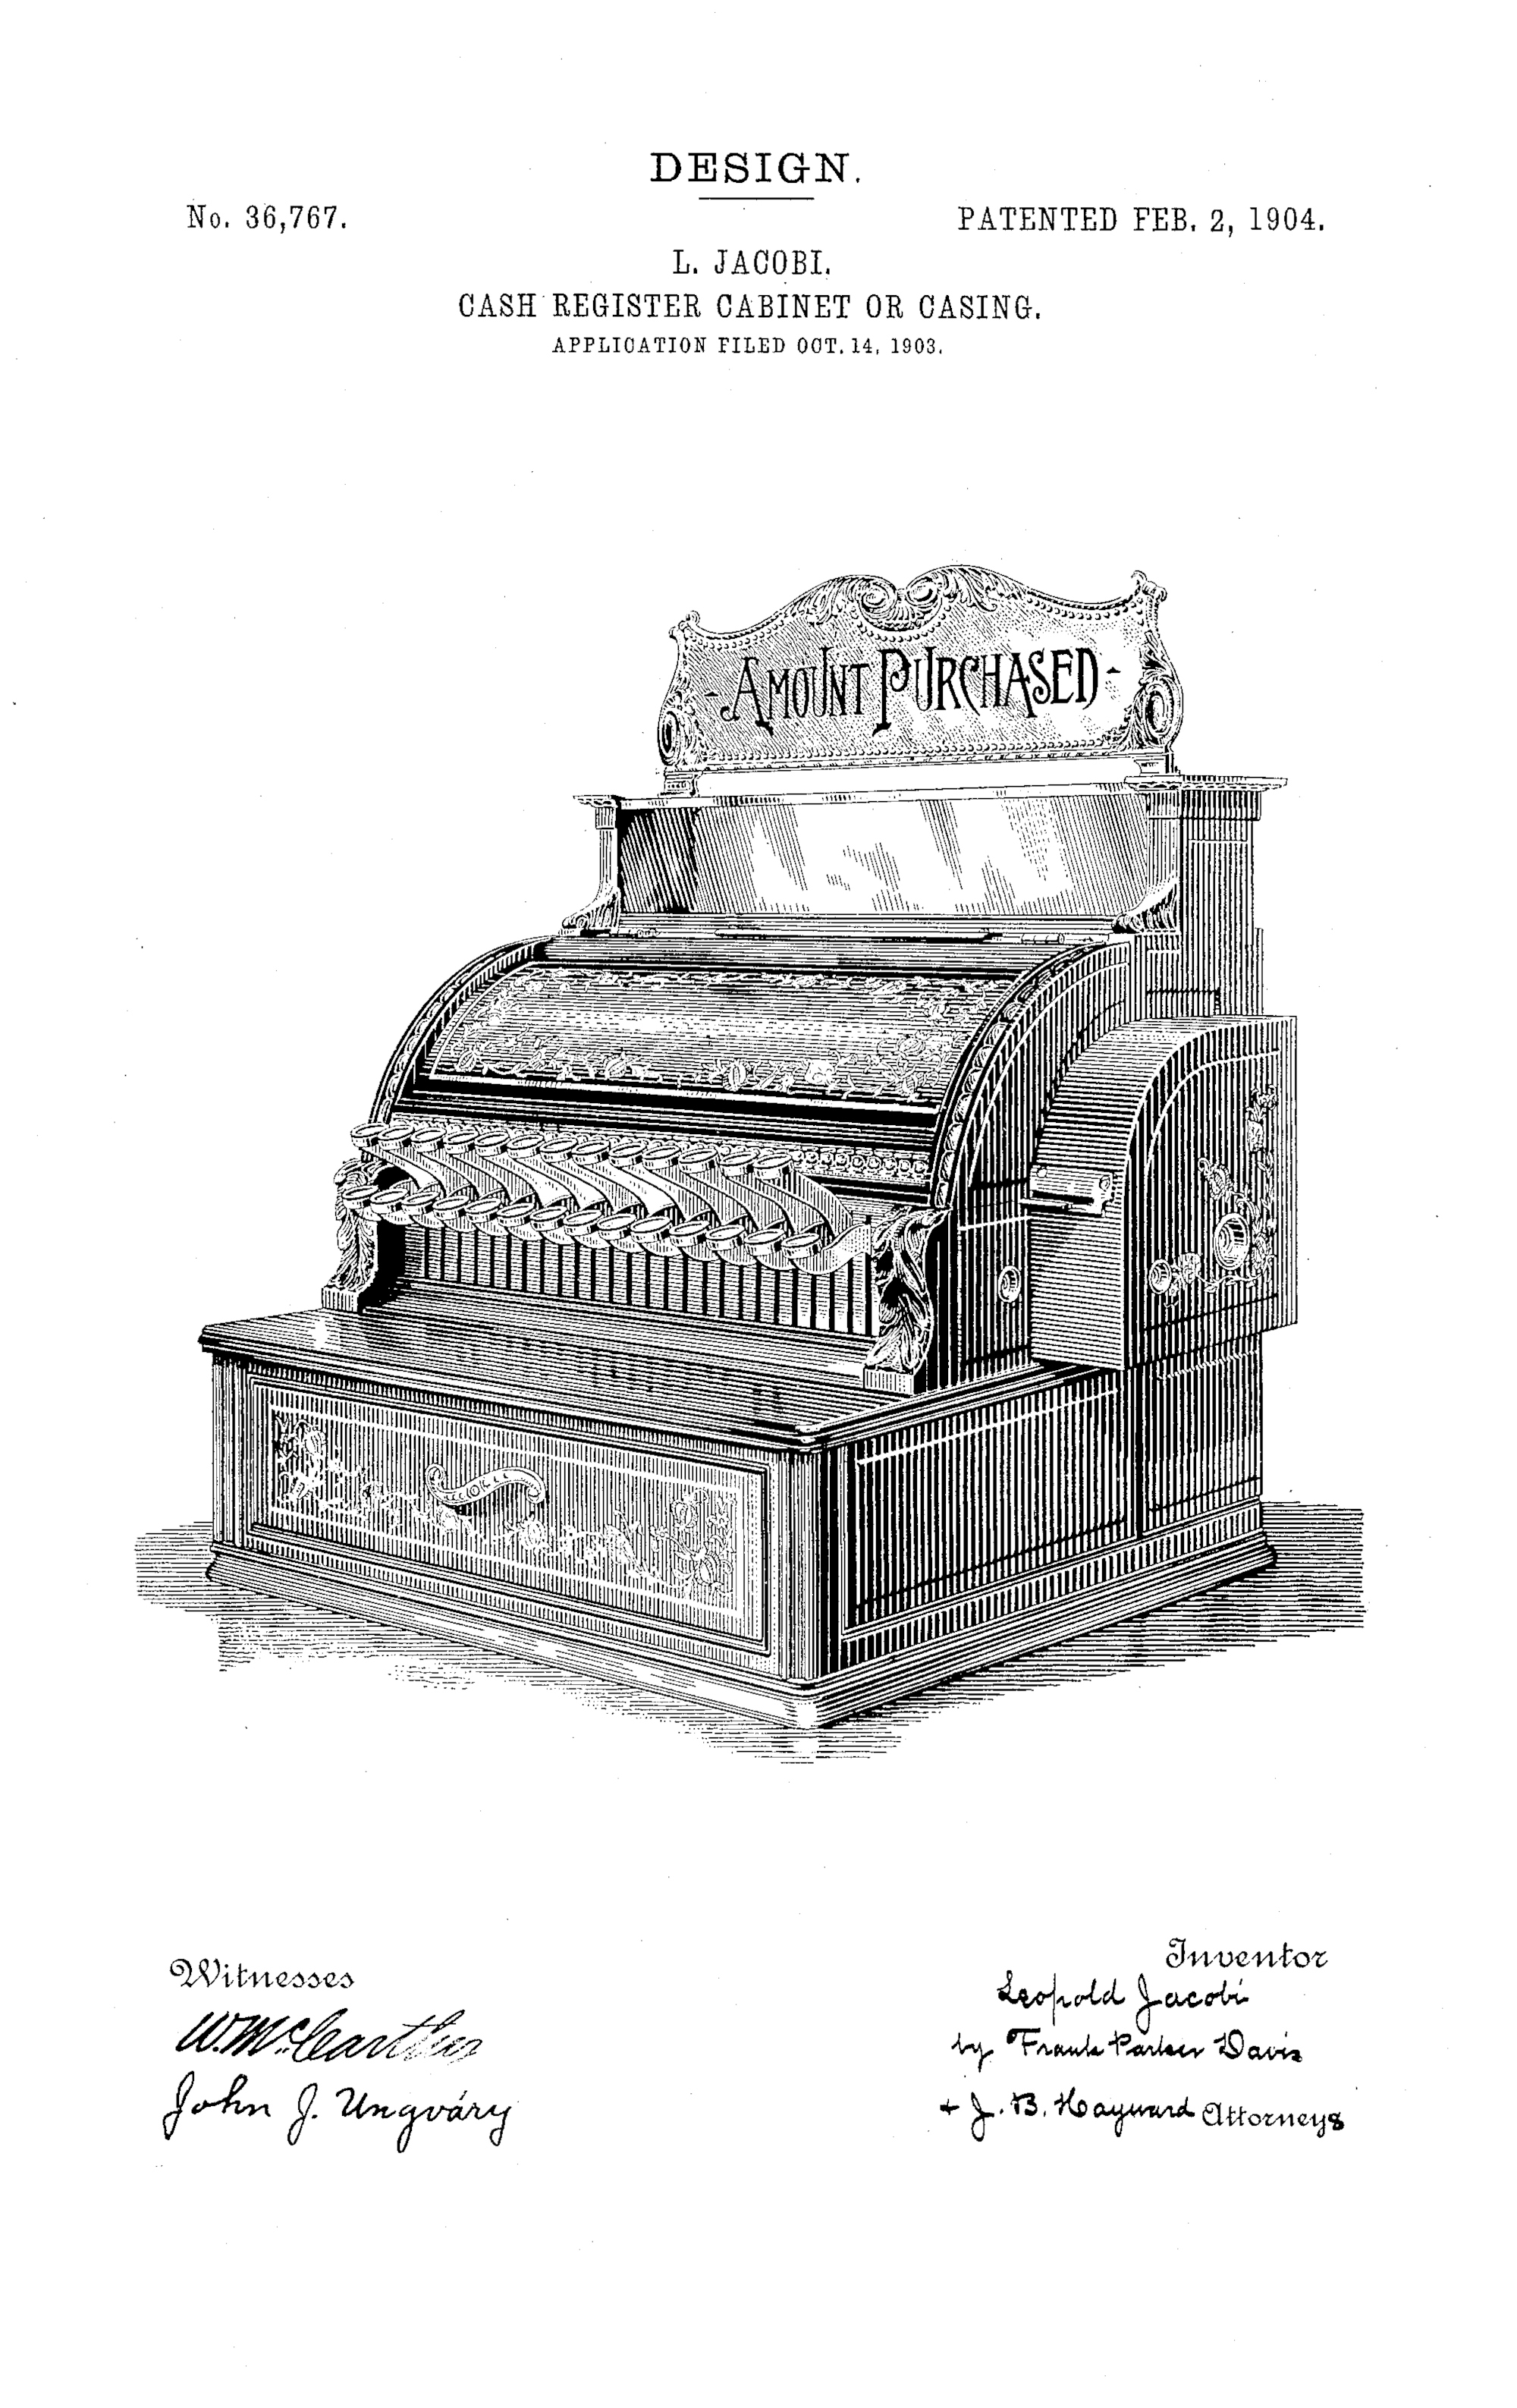 Casing, Leopold Jacobi, for the National Cash Register Company, 1903-1904. Patent Number: USD 36,767, U.S. Patent Office